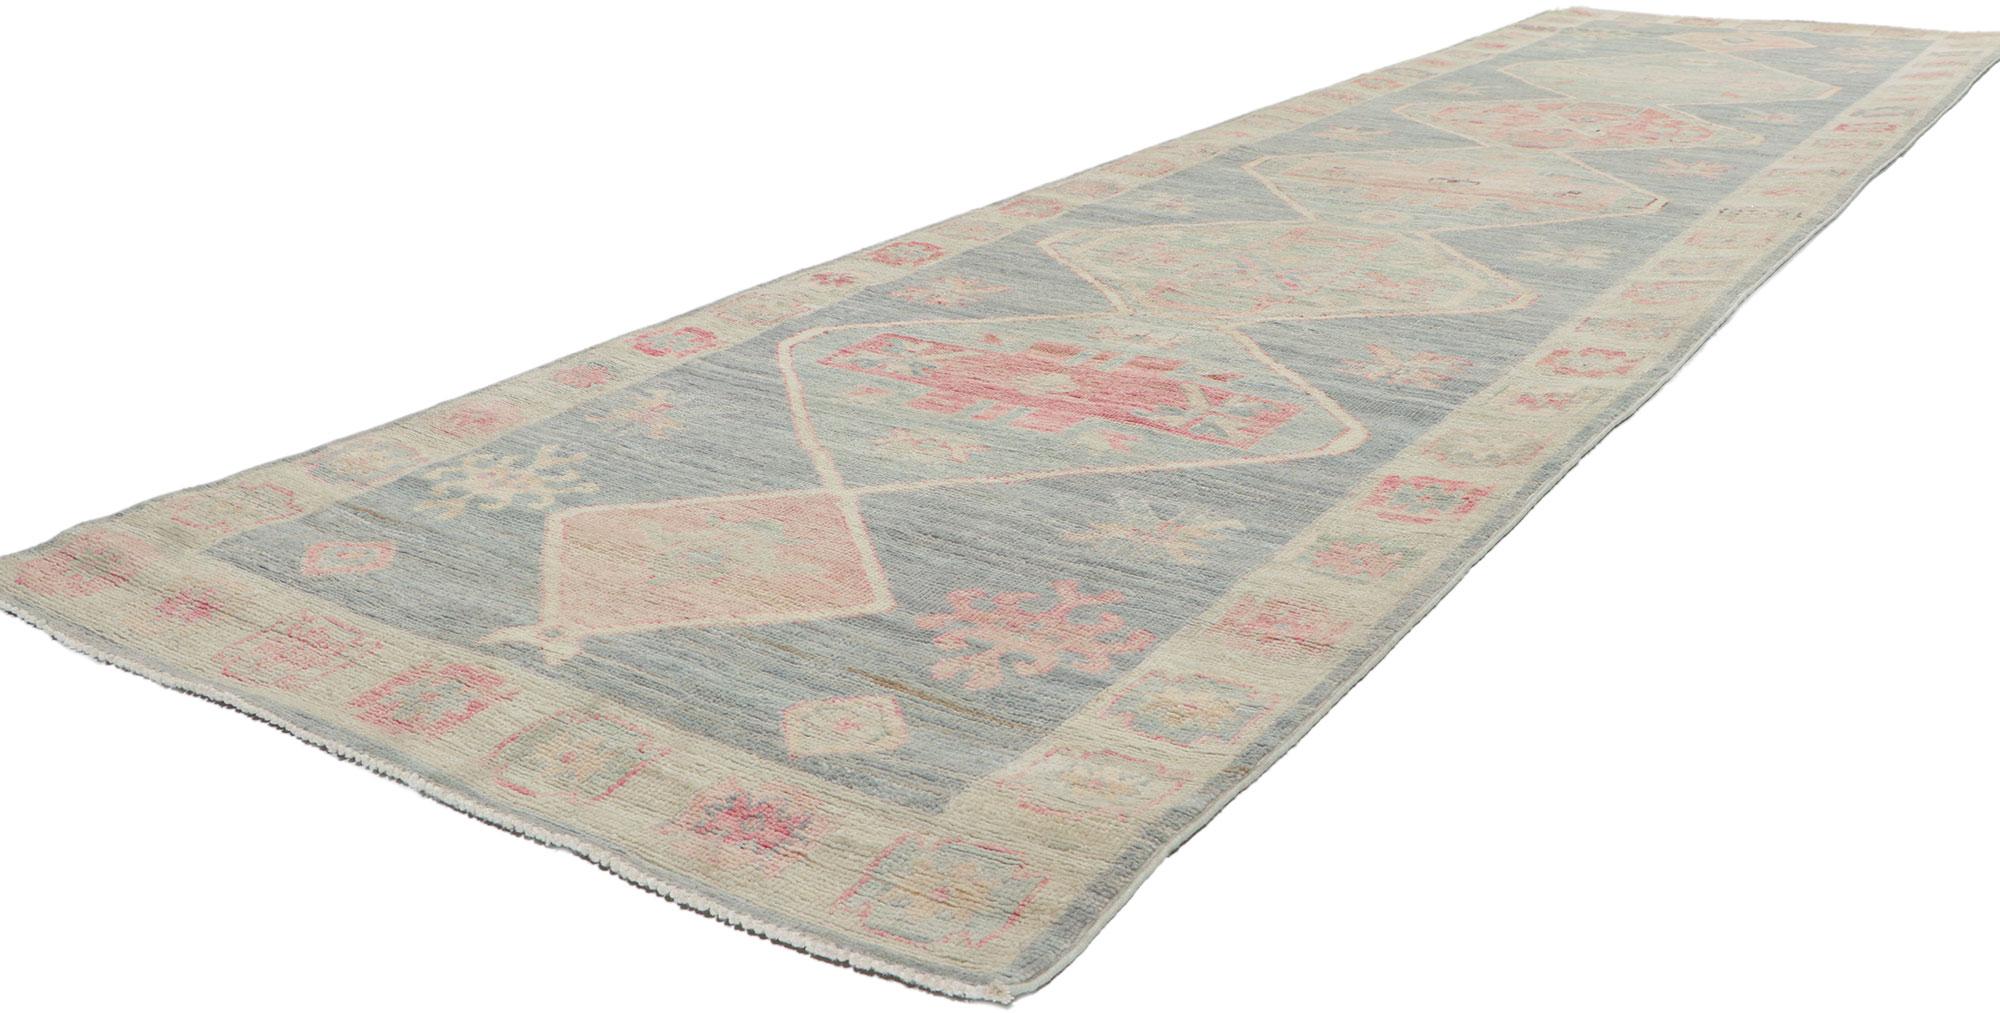 80879 New Vintage-Inspired Oushak Runner with Modern Style, 03'04 x 12'07.
Polished and playful, this hand-knotted wool contemporary Oushak runner beautifully embodies a modern style. The abrashed field features stacked medallions decorated with